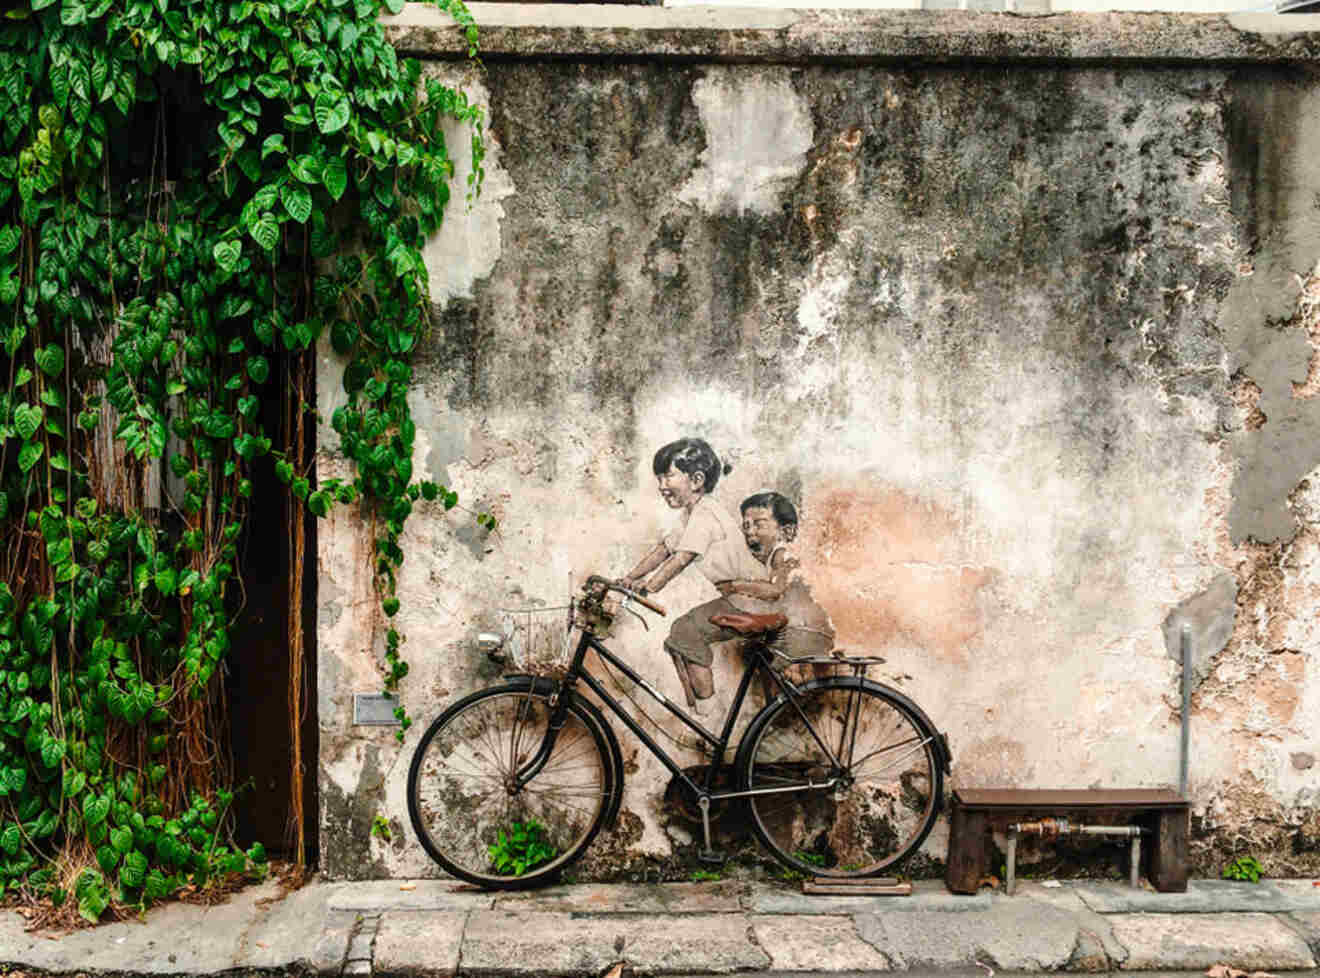 Street art in Penang: a mural of a boy and girl made to look like they are riding a real bicycle